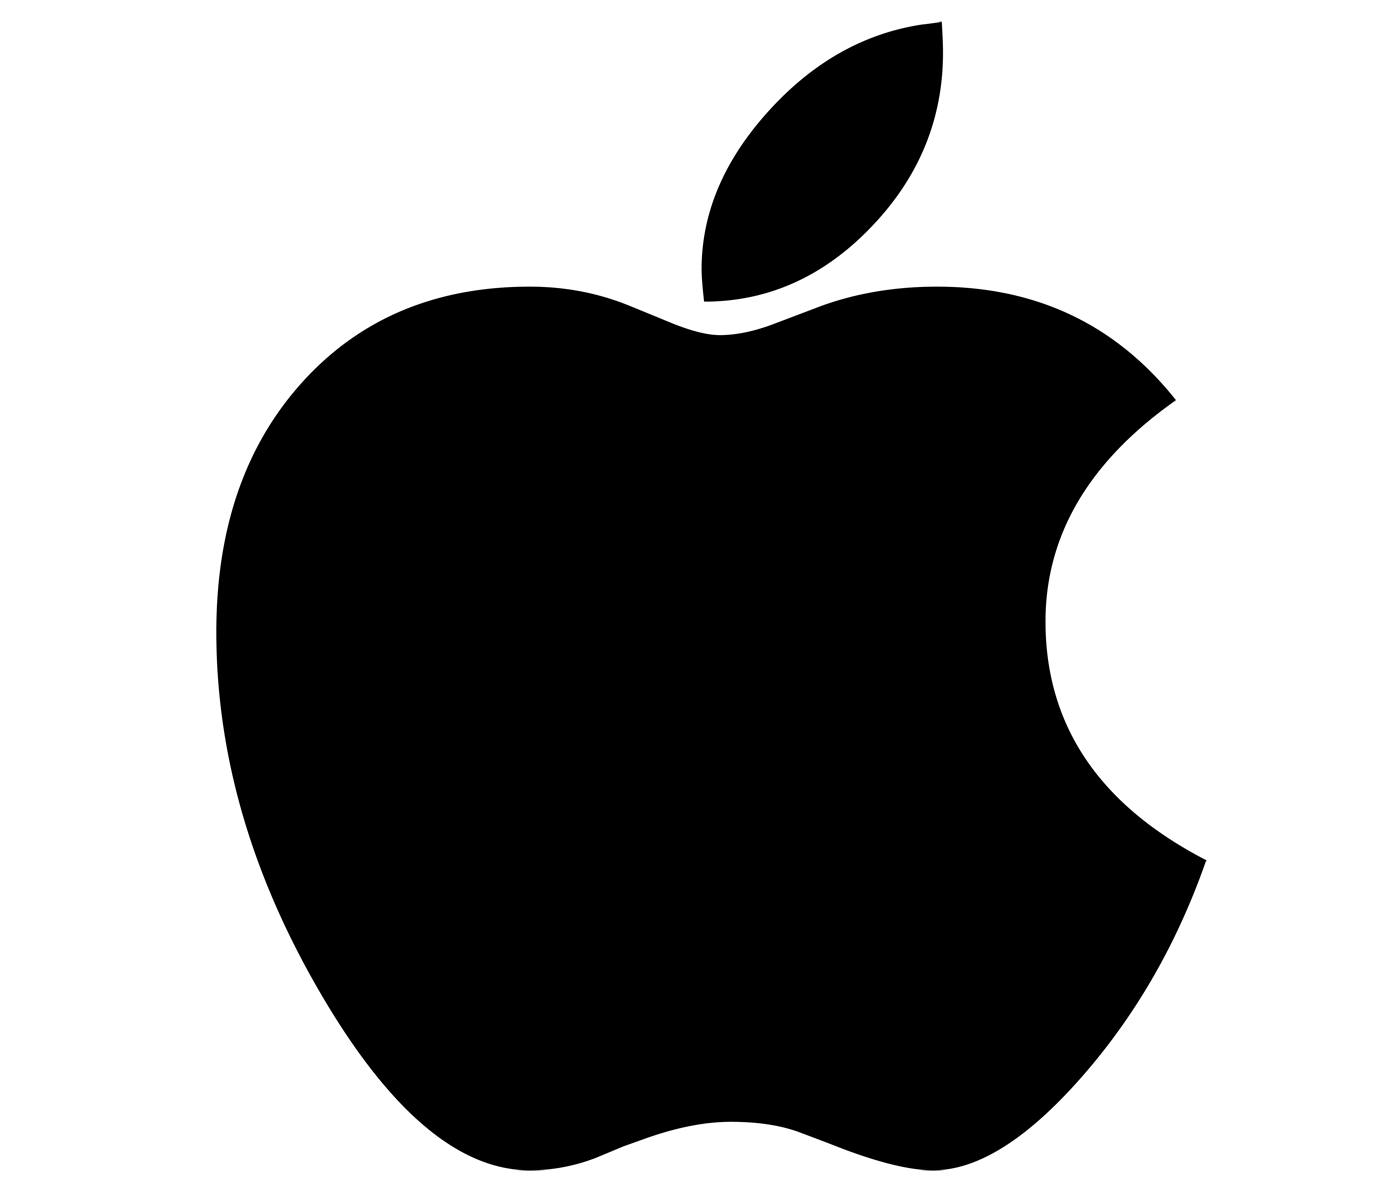 White Apple iPhone Logo - iPhone Logo, iPhone Symbol Meaning, History and Evolution